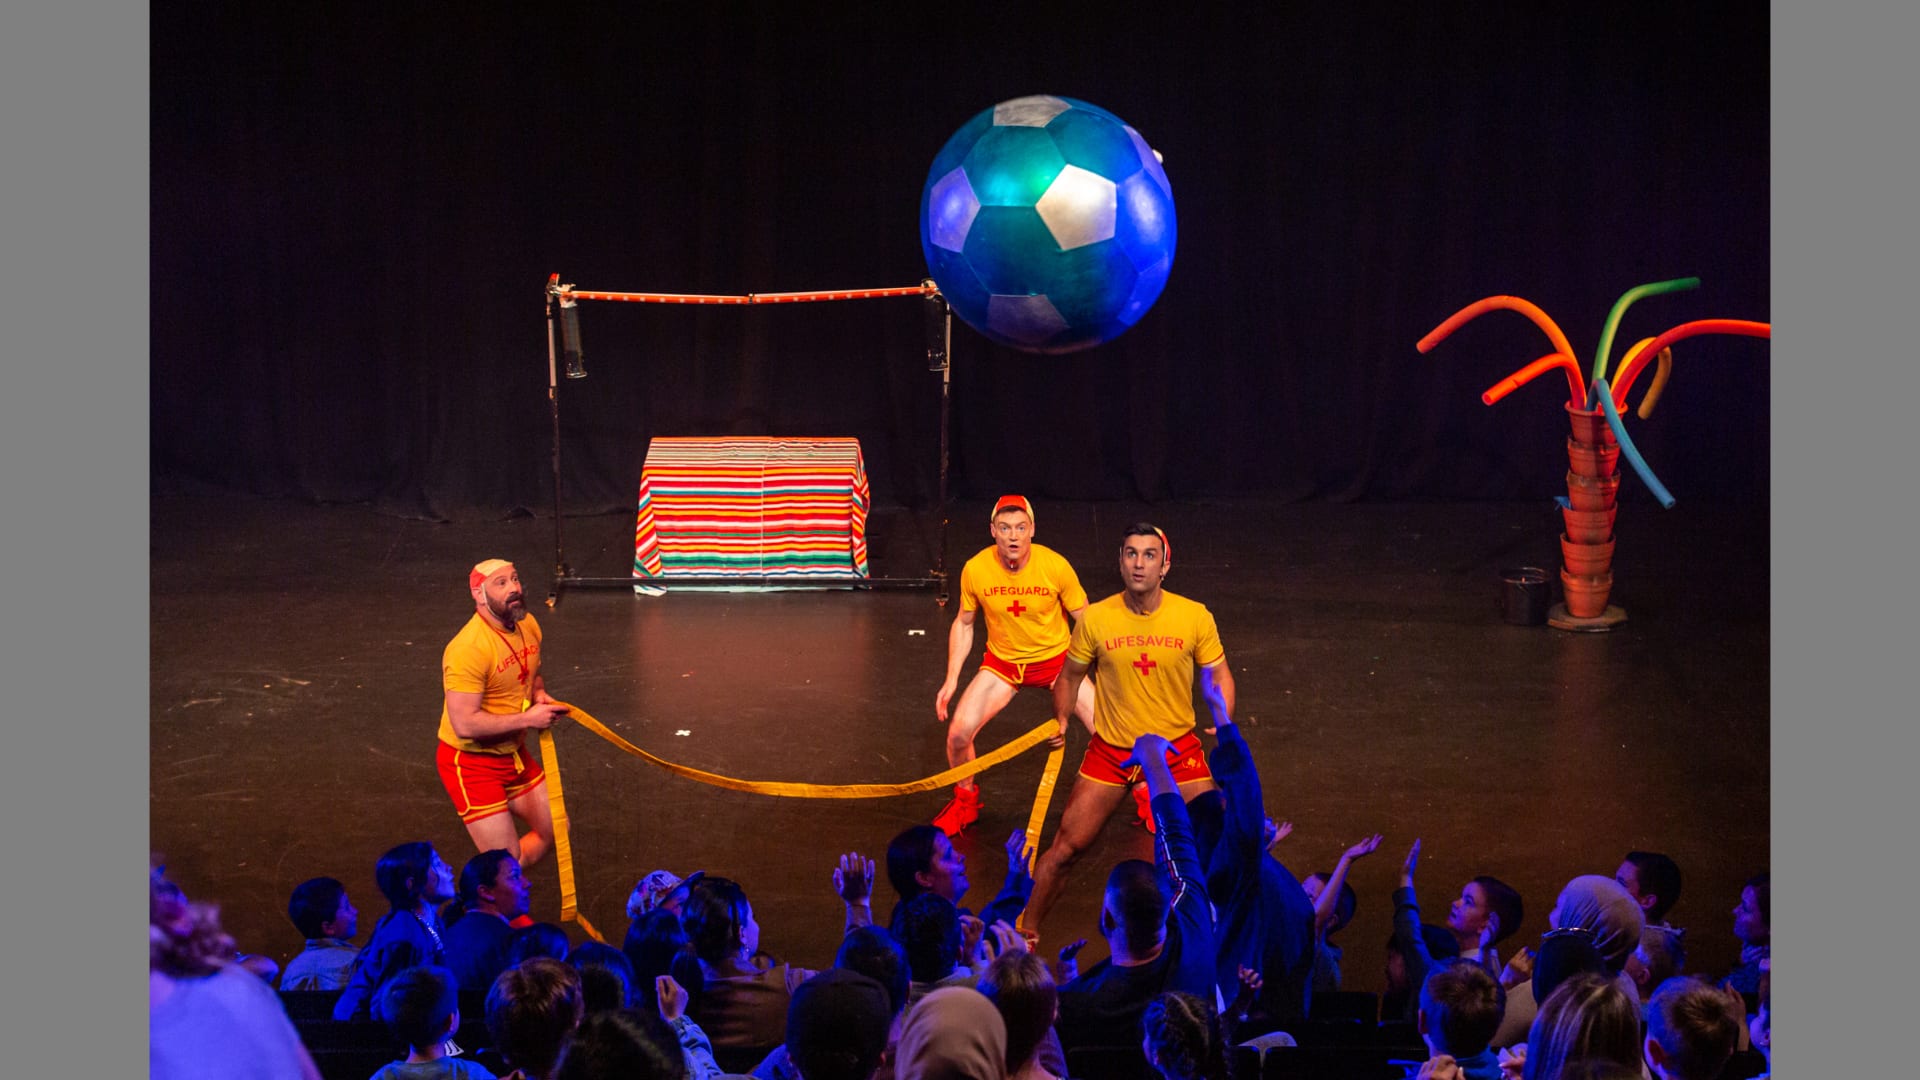 The Dummies keep watch of a bouncy ball which is being bounced around the audience